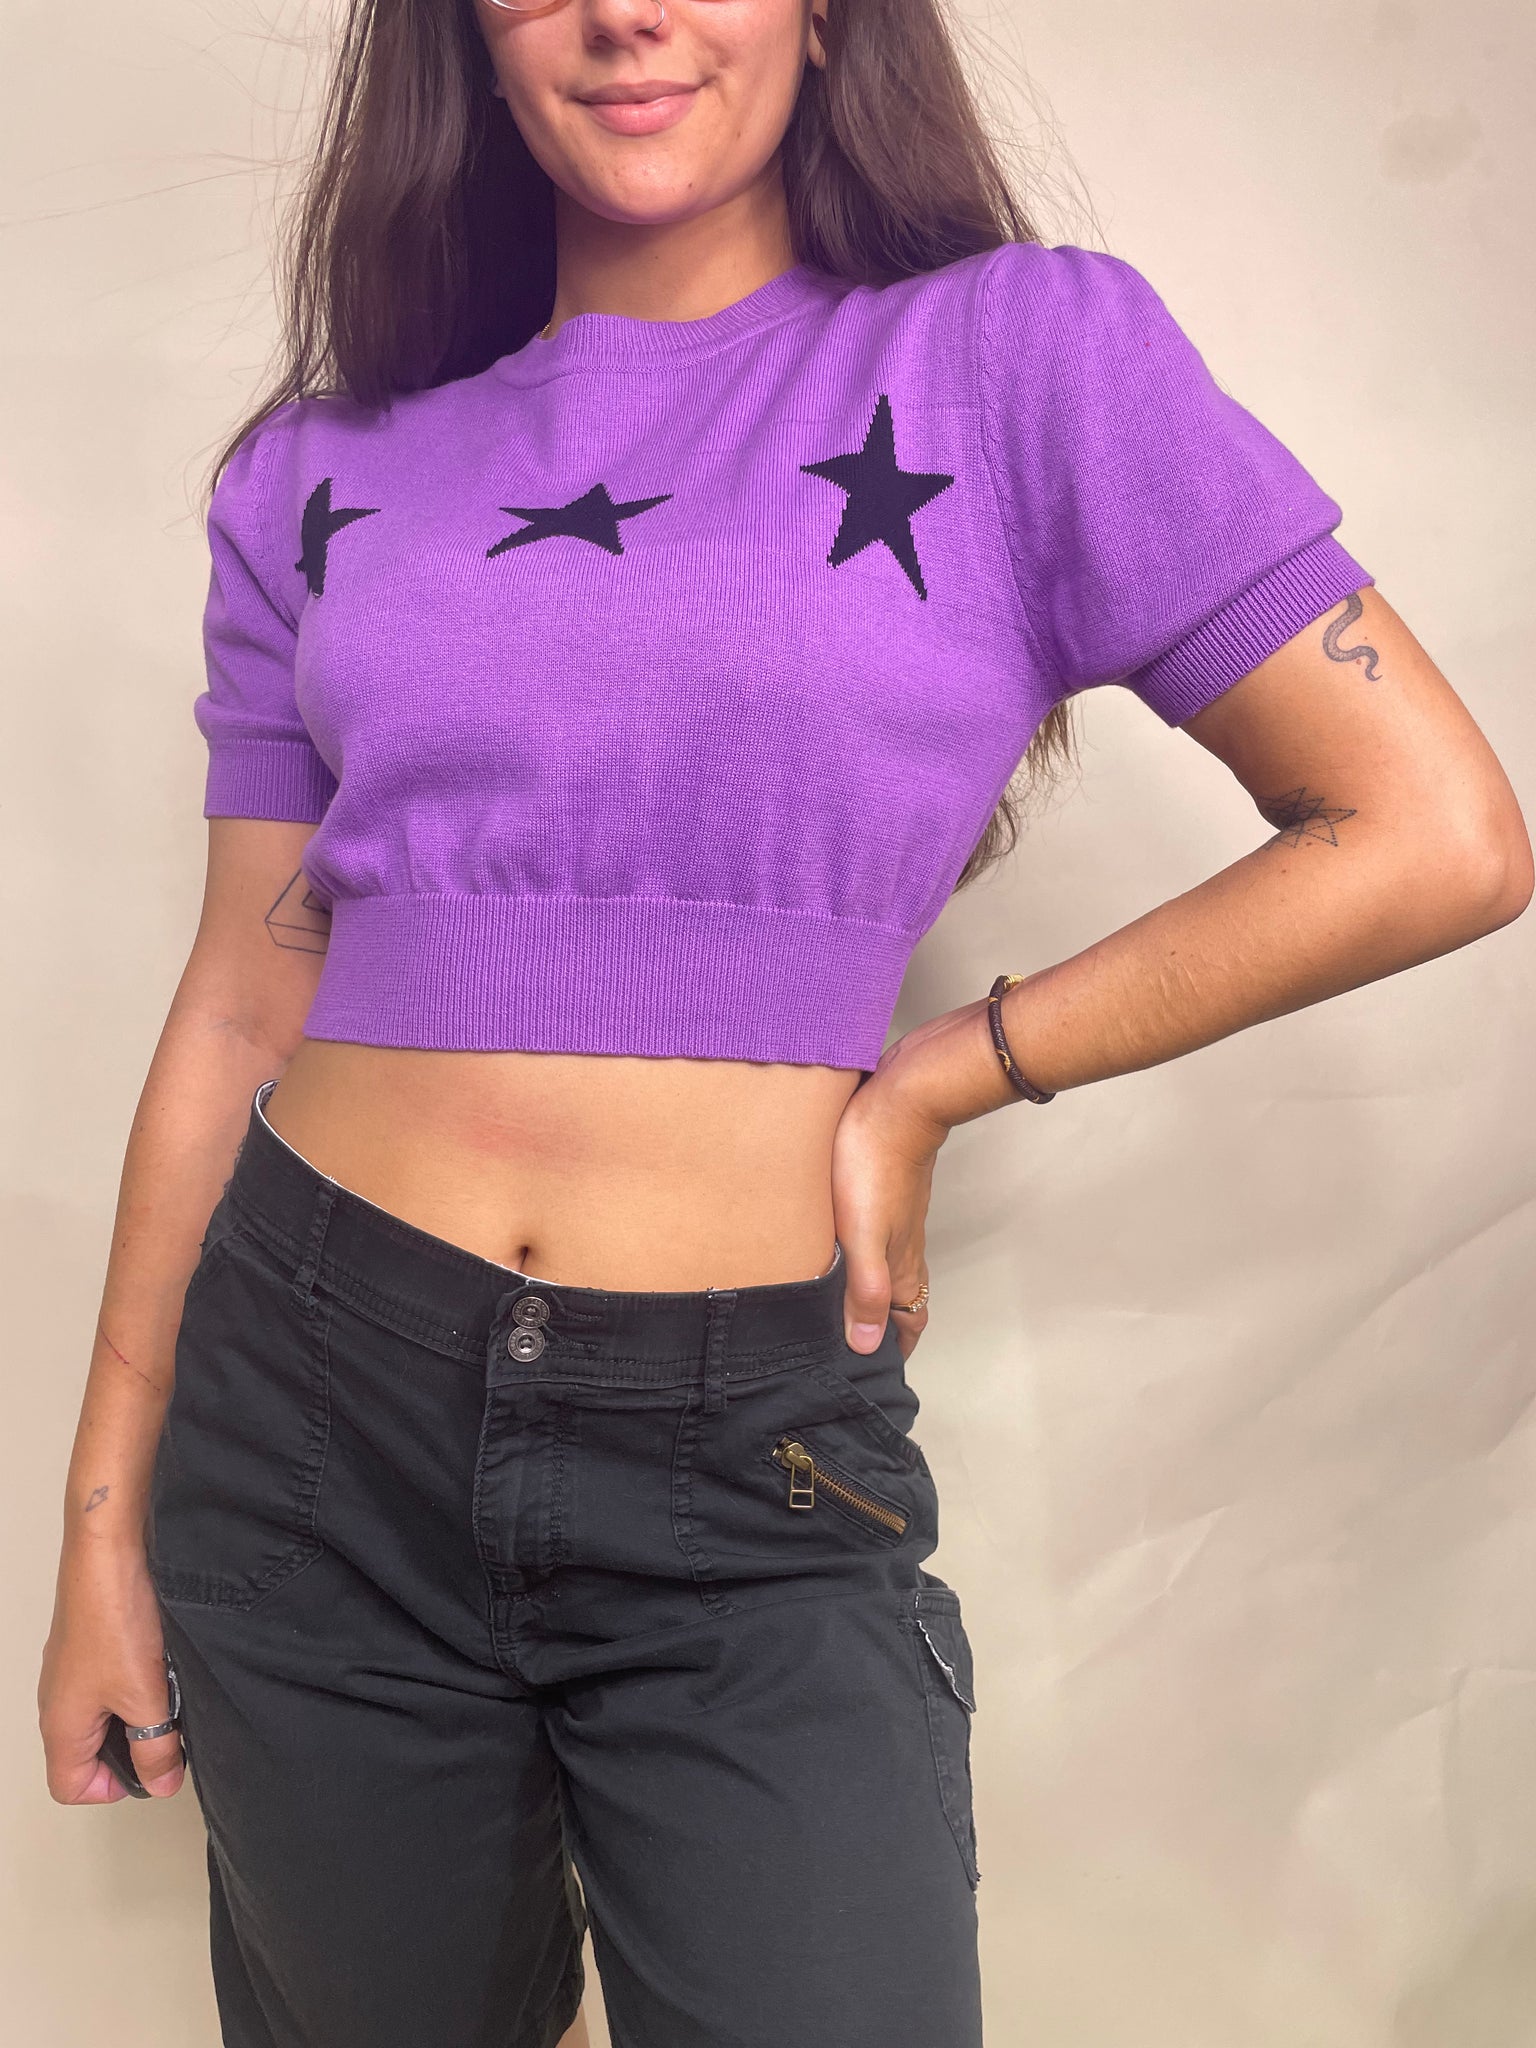 NEW cropped star sweater, Size S